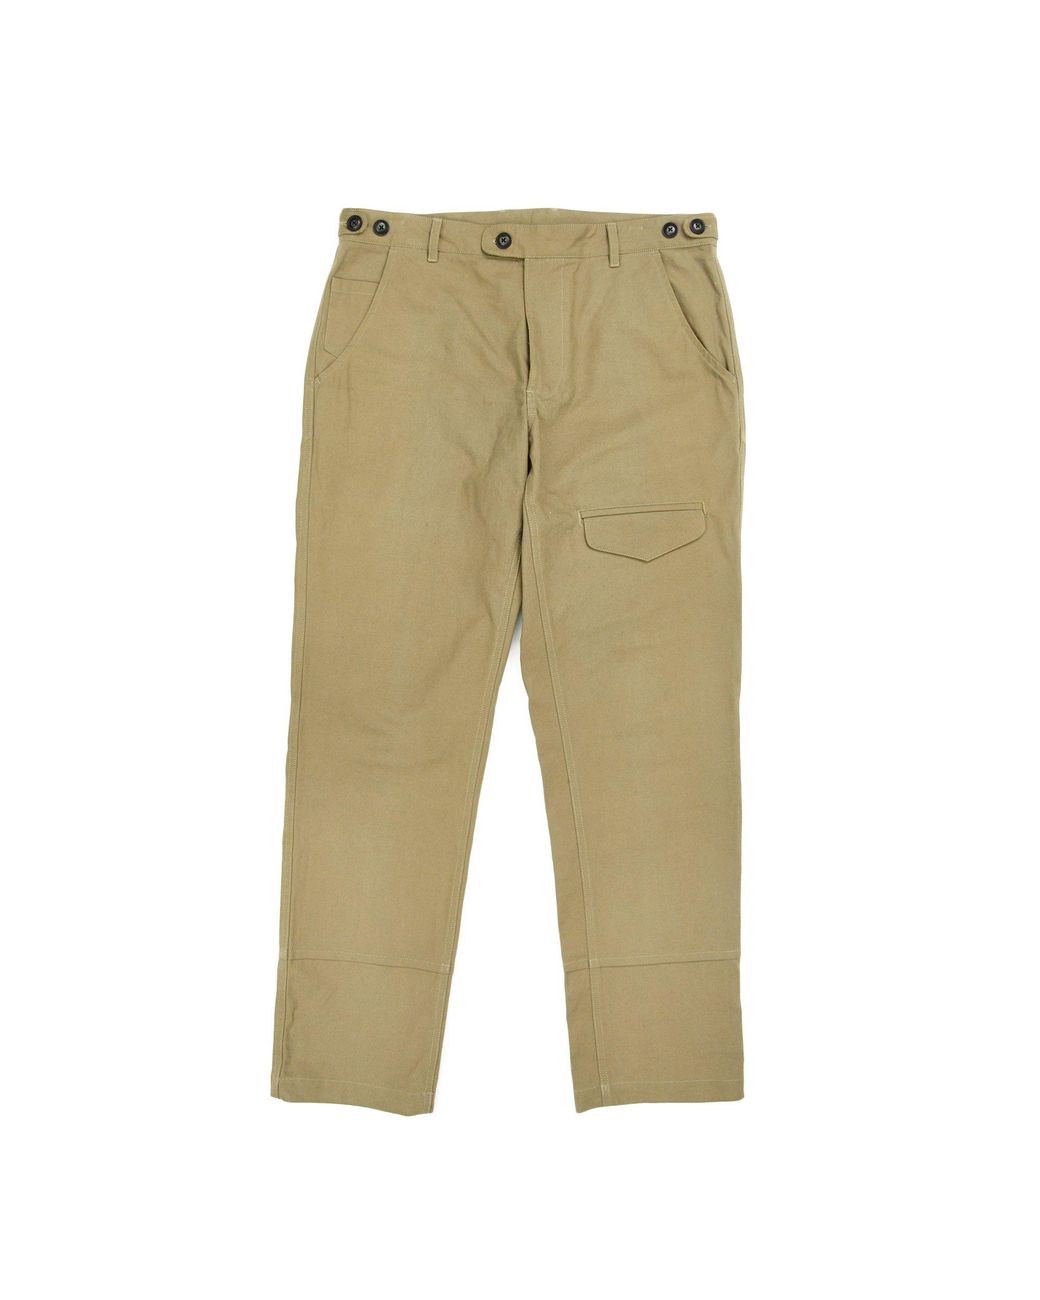 Corridor NYC Heavy Canvas Khaki Flap Pants in Natural for Men - Lyst